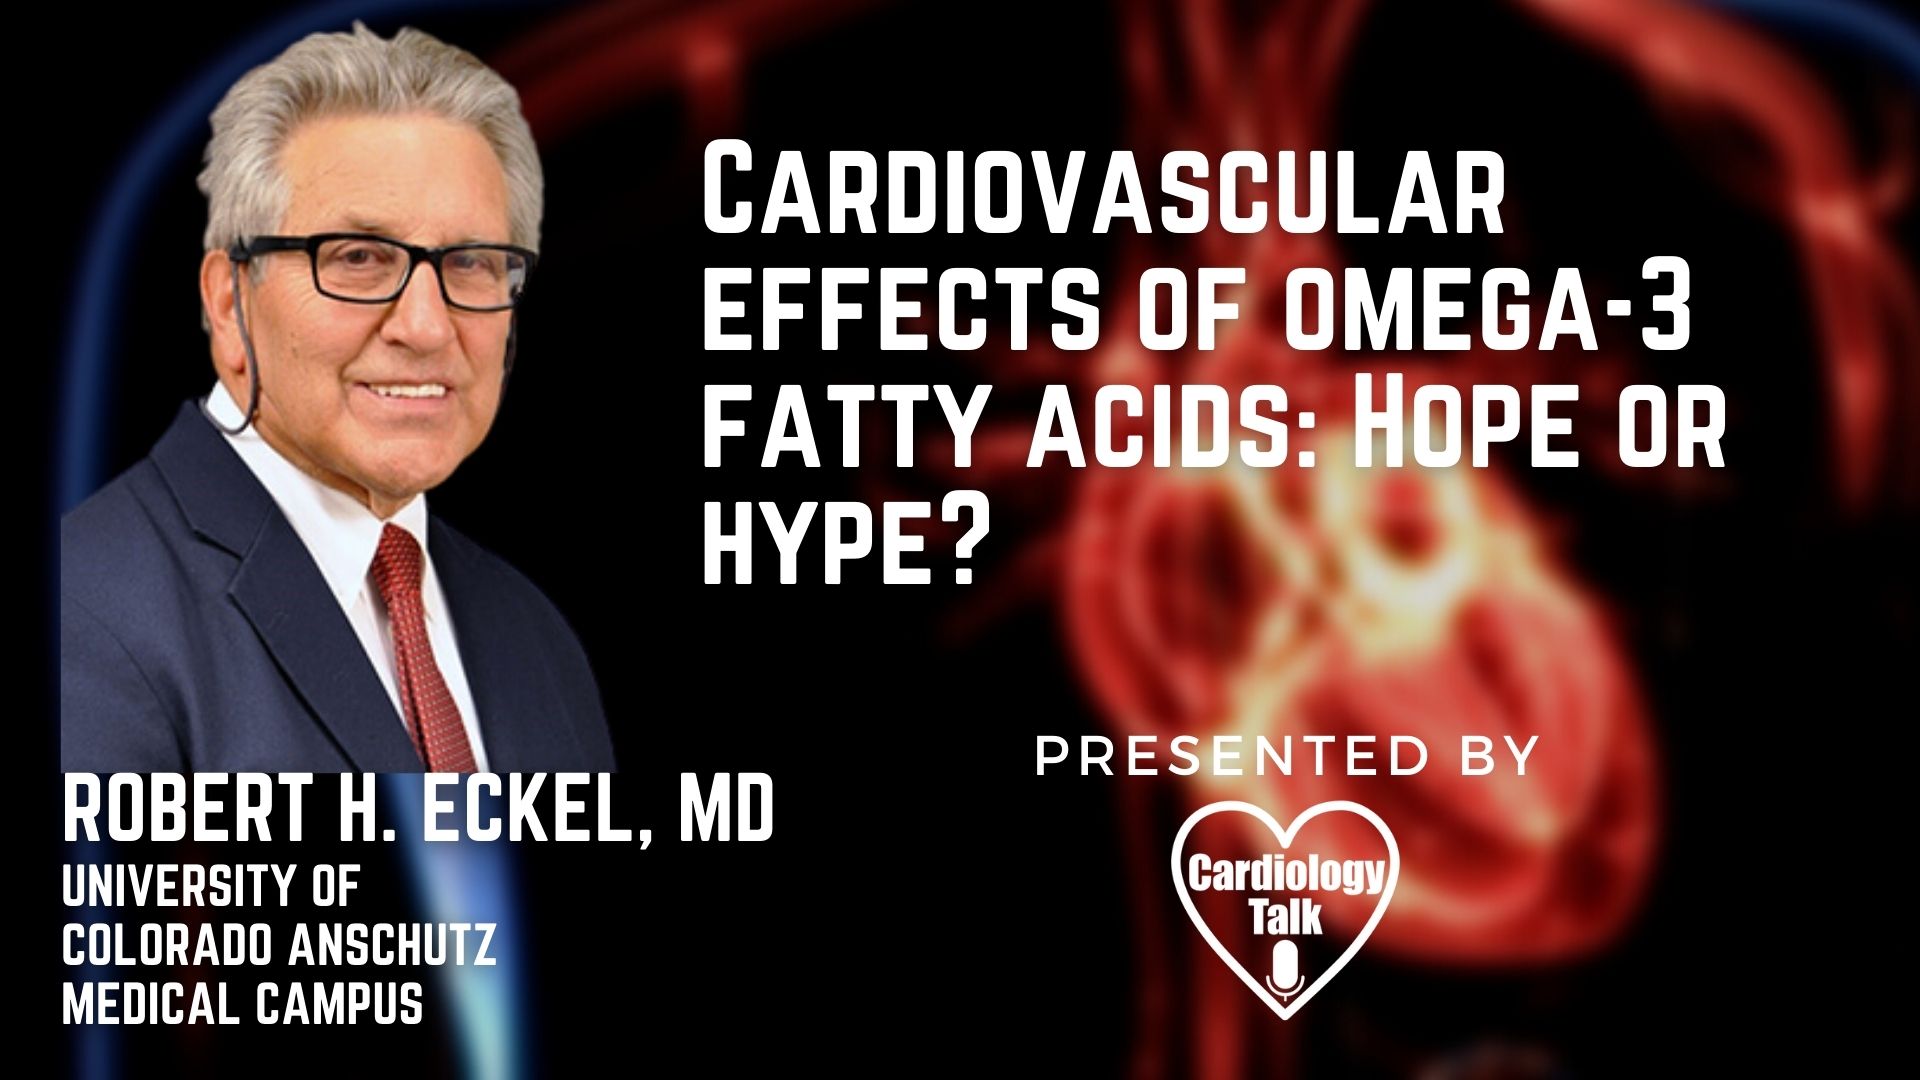 Robert H. Eckel, MD @CUAnschutz @CUDeptMedicine #Cardiovascular #Cardiology #Research Review Article - Cardiovascular effects of omega-3 fatty acids: Hope or hype?